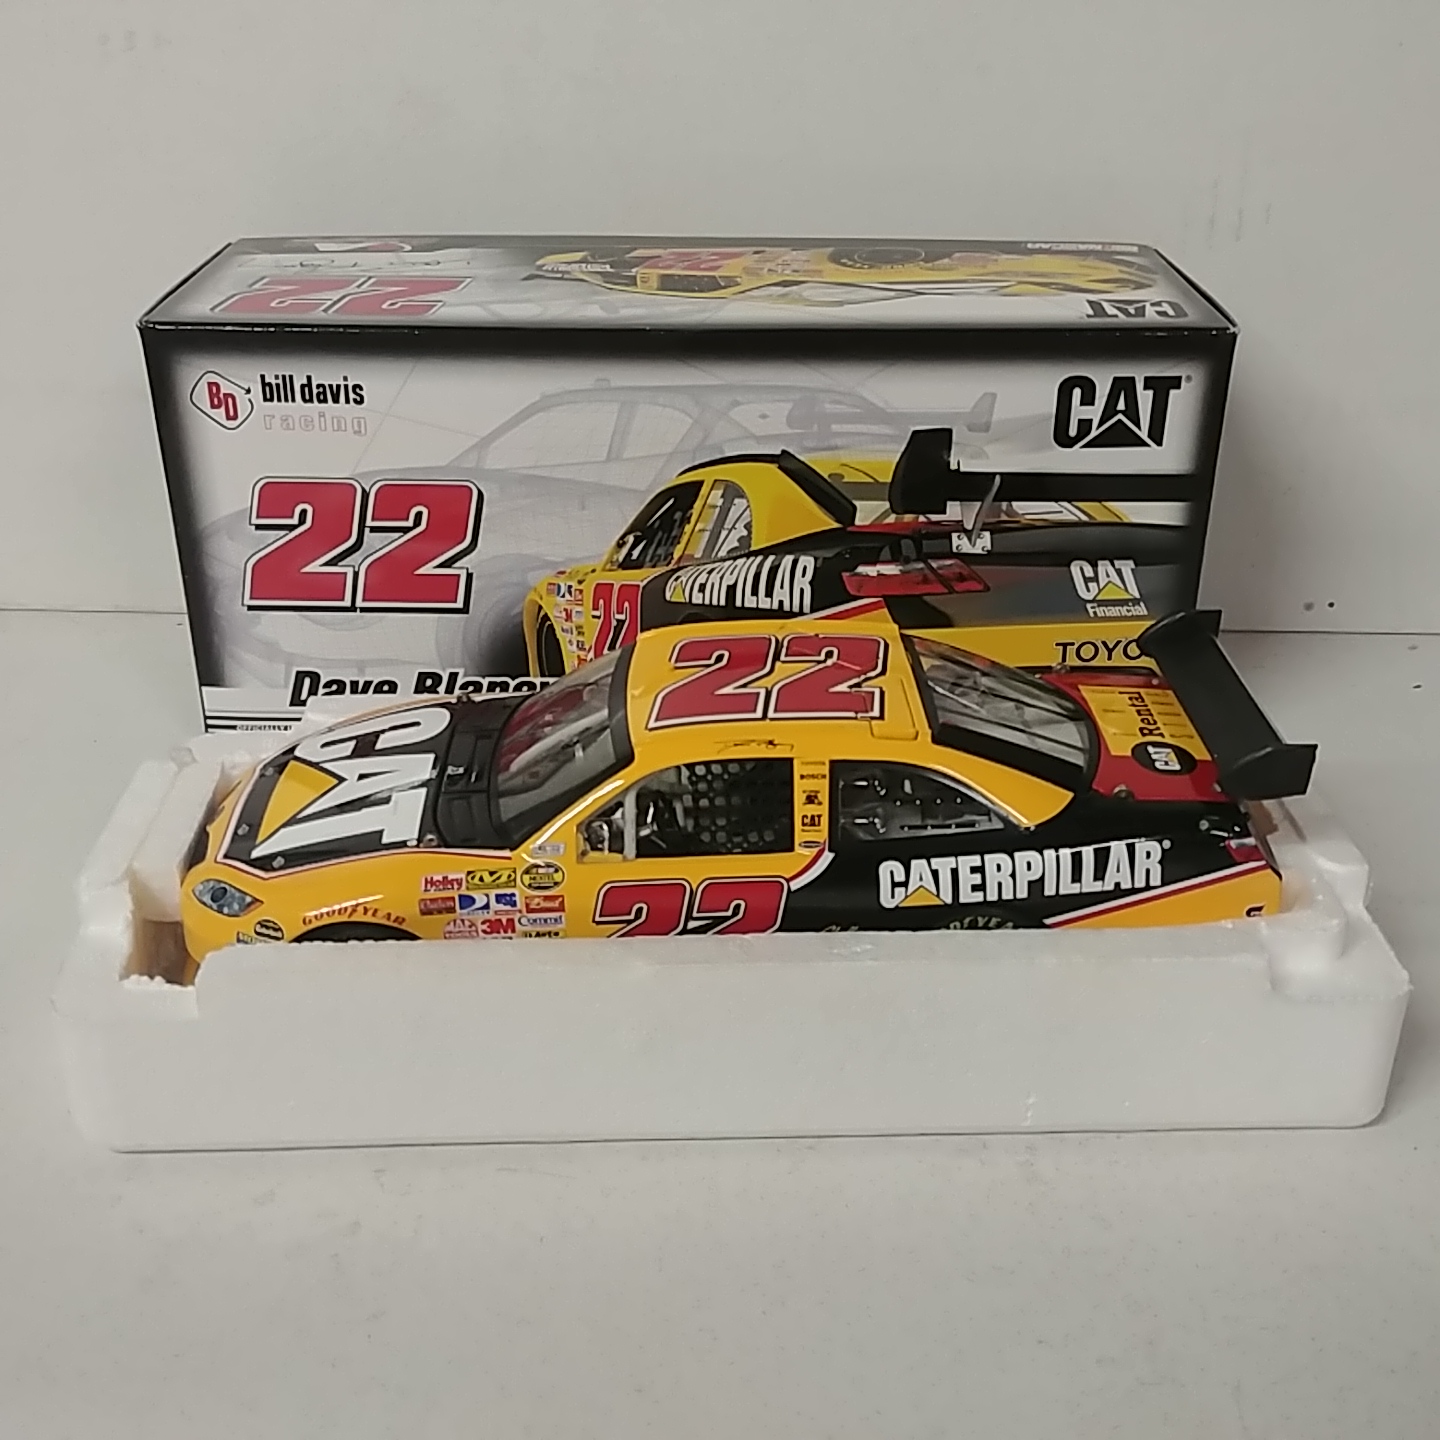 2007 Dave Blaney 1/24th Caterpillar "Car of Tomorrow" Toyota Camry